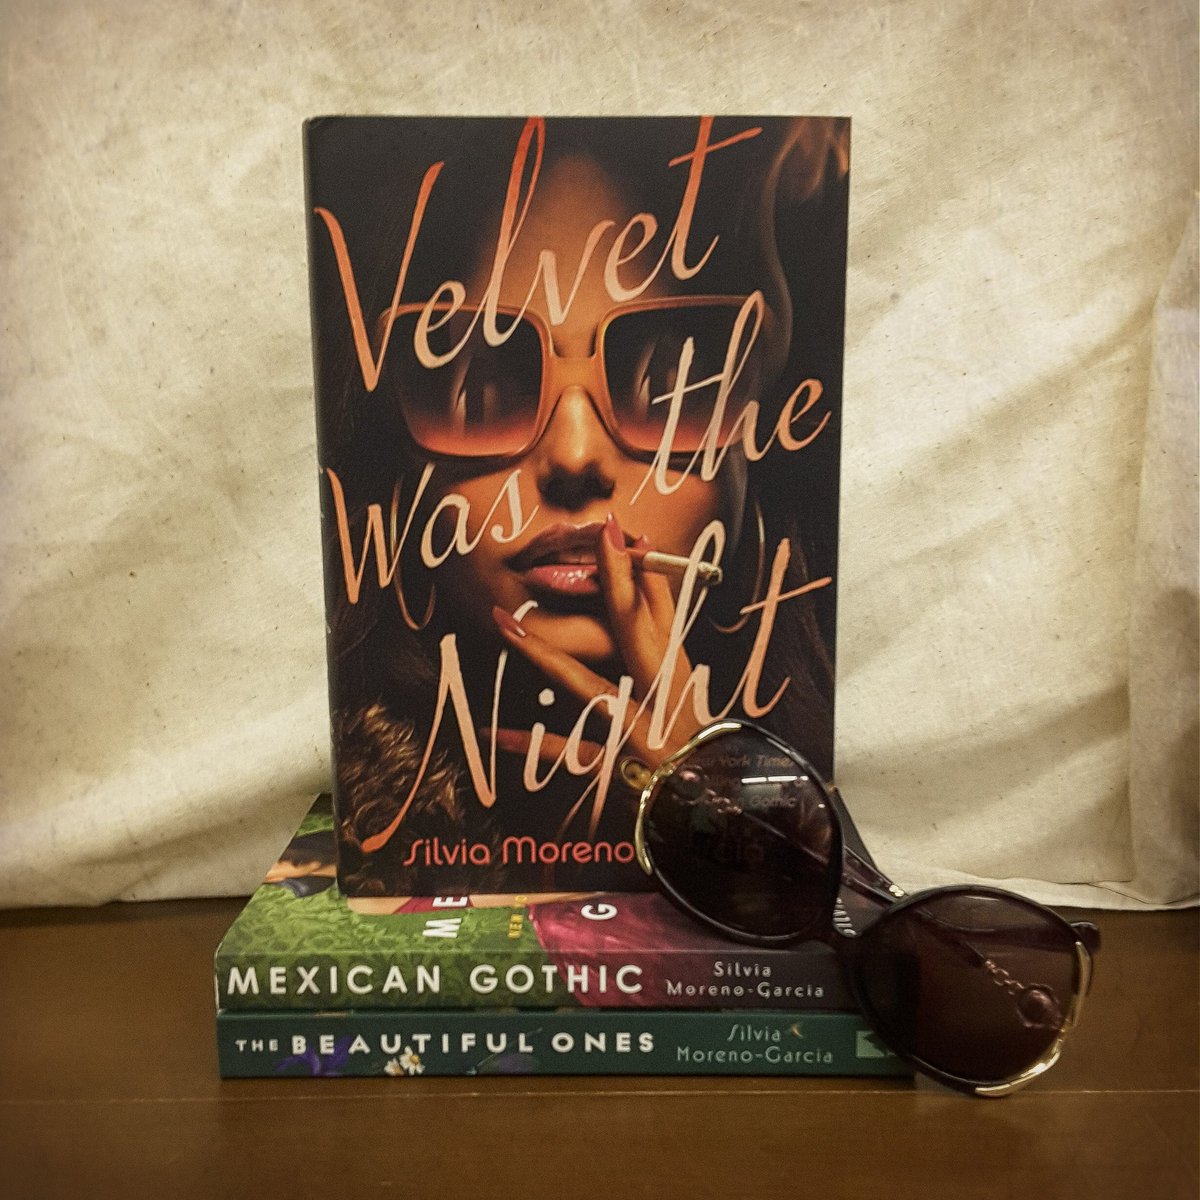 Silvia Moreno-Garcia excels no matter the genre, and her newest noir mystery Velvet Was the Night just further proves that point.

#silviamorenogarcia #mystery #noir